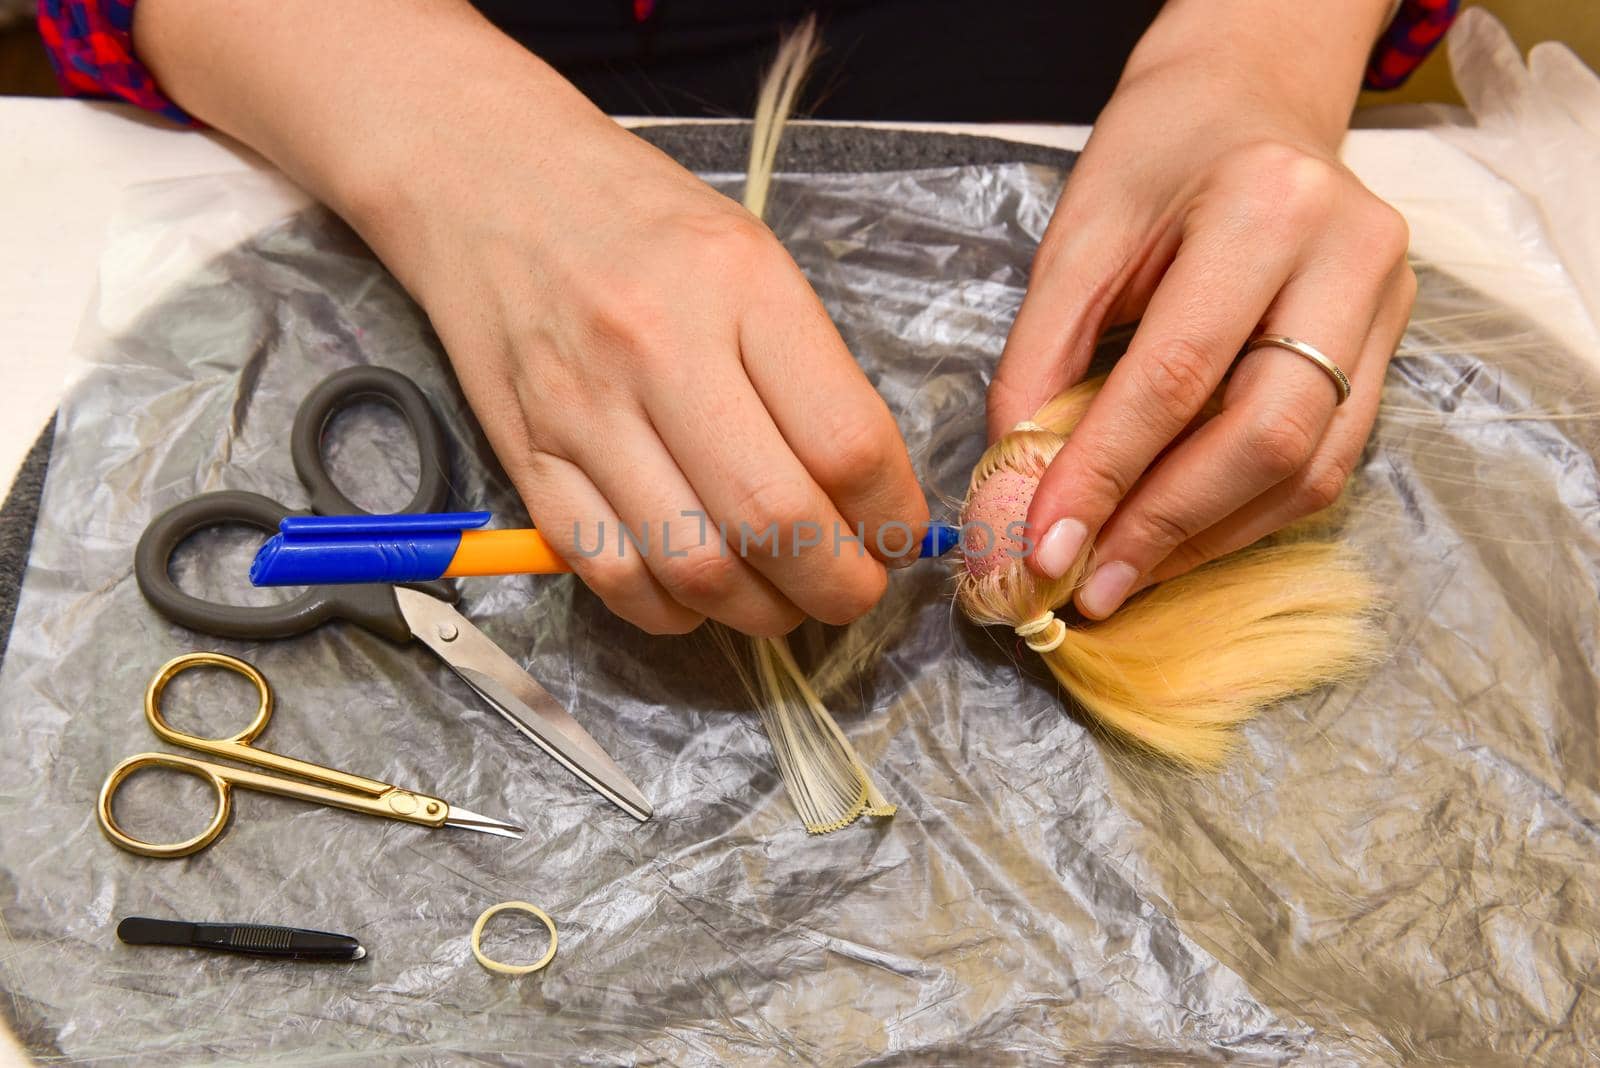 female hands and homemade tool on the table, how to make a hairstyle for a doll, hobby concept by karpovkottt